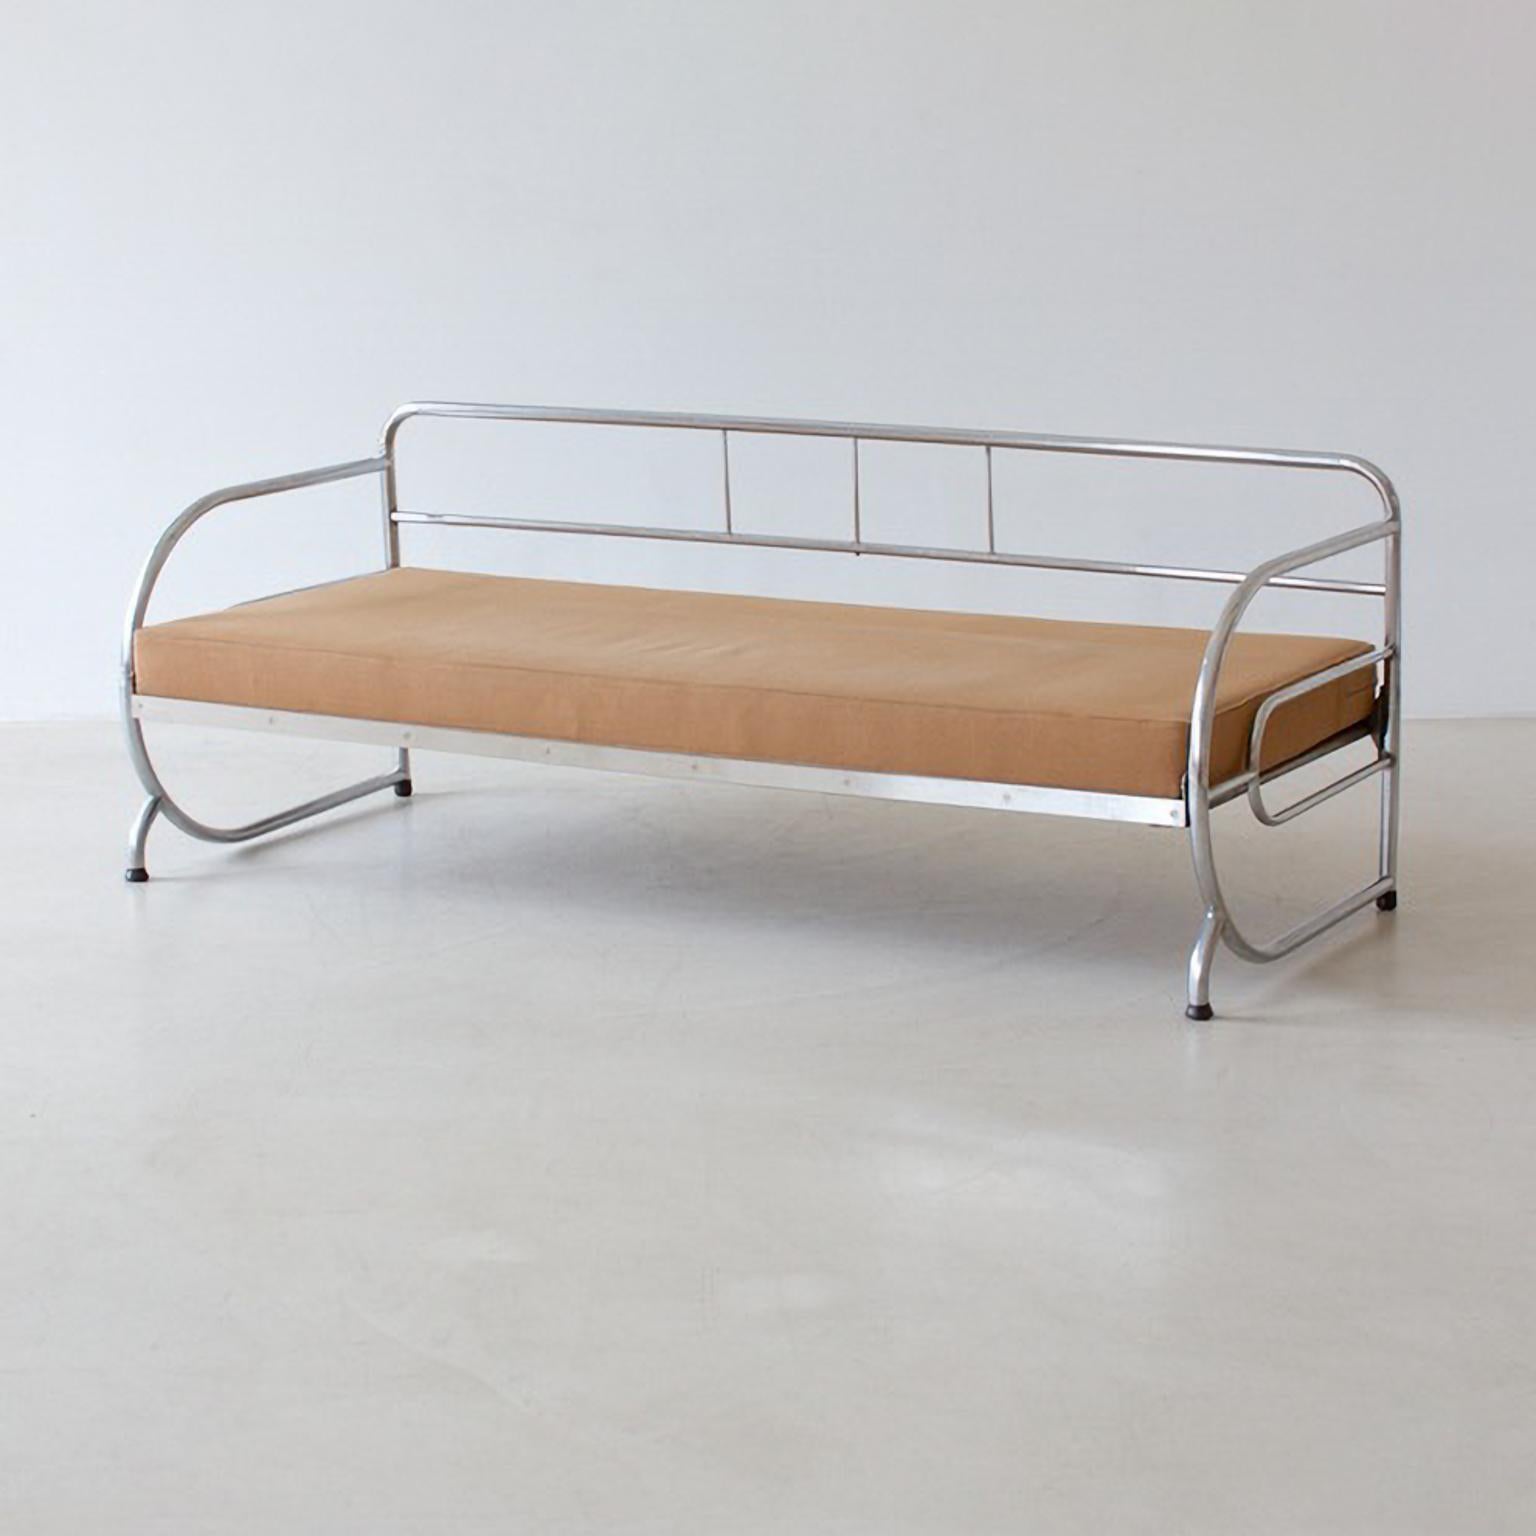 German Tubular Steel Couch / Daybed in Art Deco Streamline Design, circa 1930 For Sale